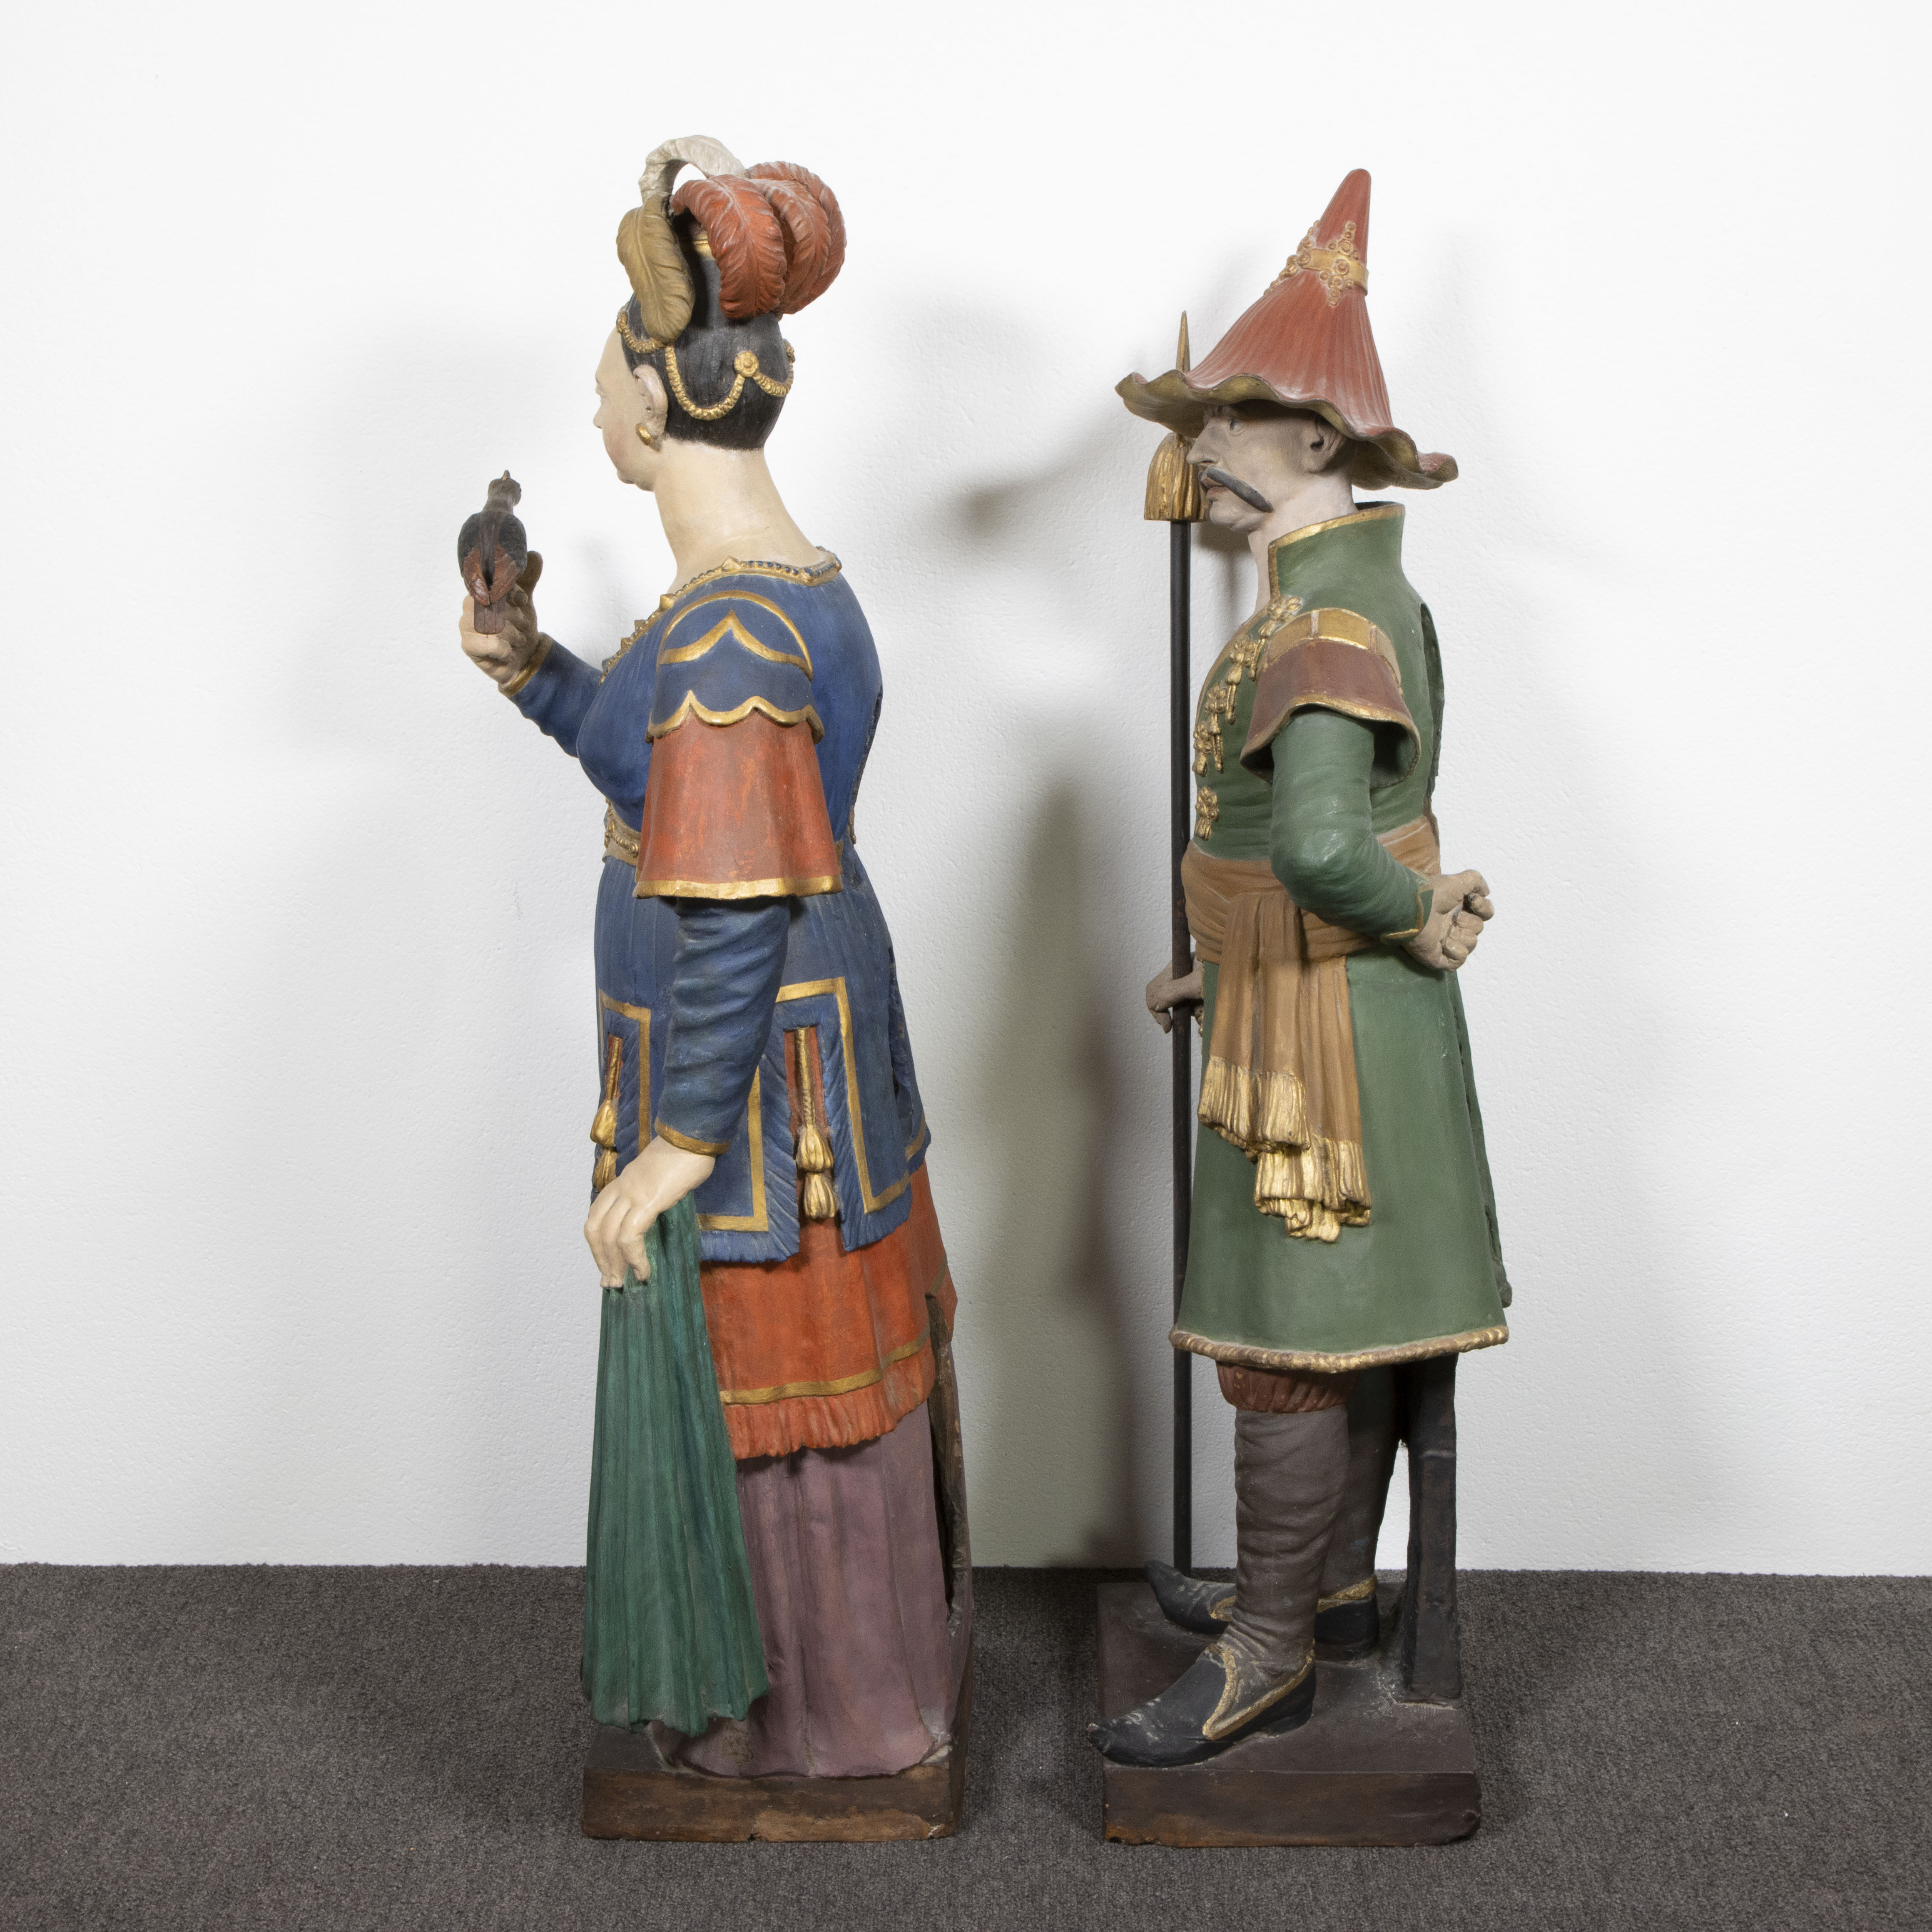 Terracotta garden statues with original polychromy from the orangery of the castle of Eksaarde. The - Image 2 of 4